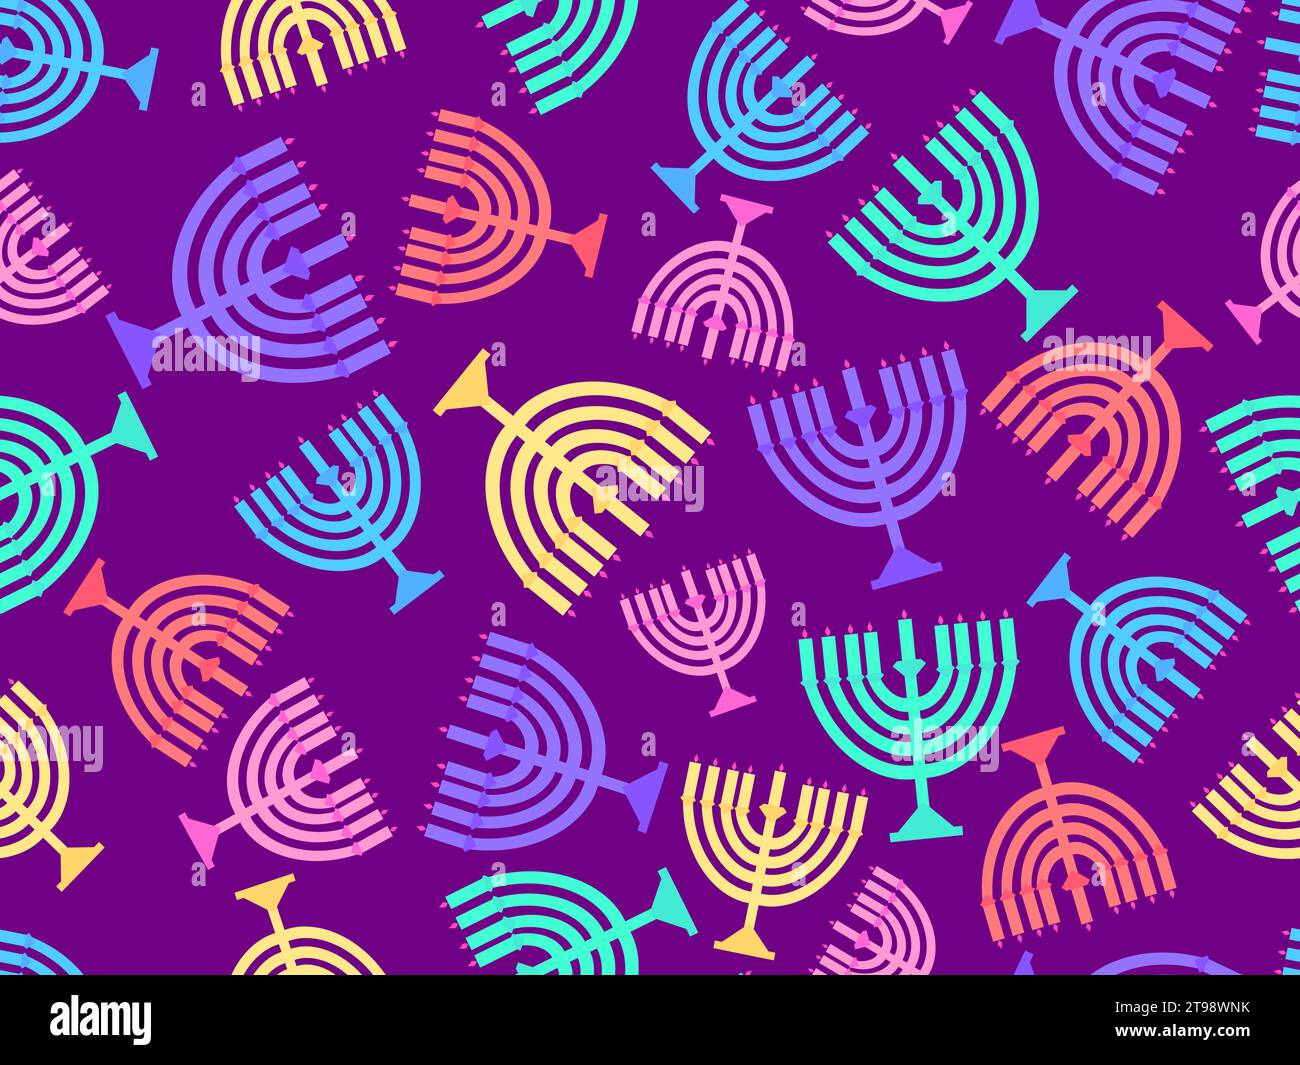 Hanukkah seamless pattern with Menorah with nine candles. Lighted Hanukkah candles. Design of greeting cards, banners and promotional products. Vector Stock Vector